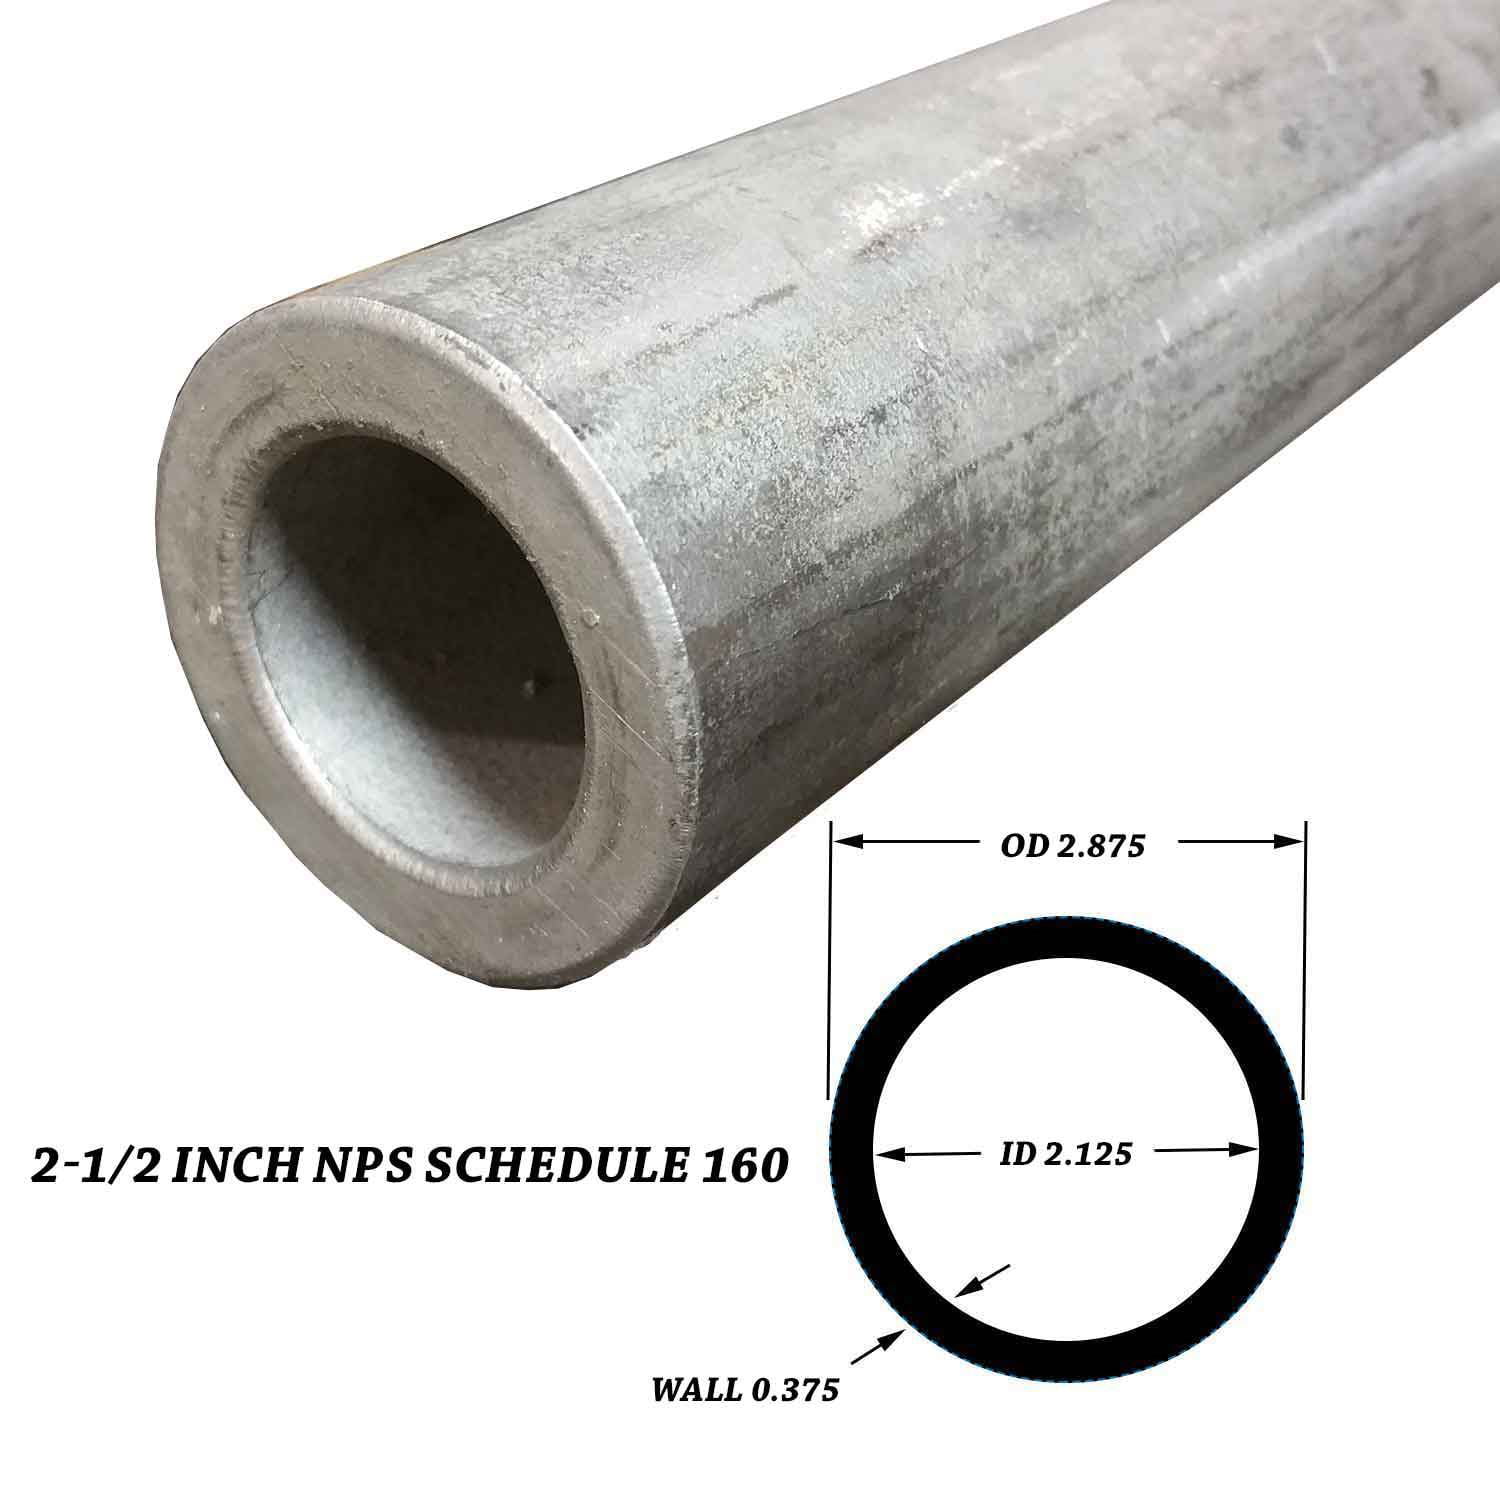 Seamless 304 Stainless Steel Round Tube 2-1/2" OD x 0.375" Wall x 12" long